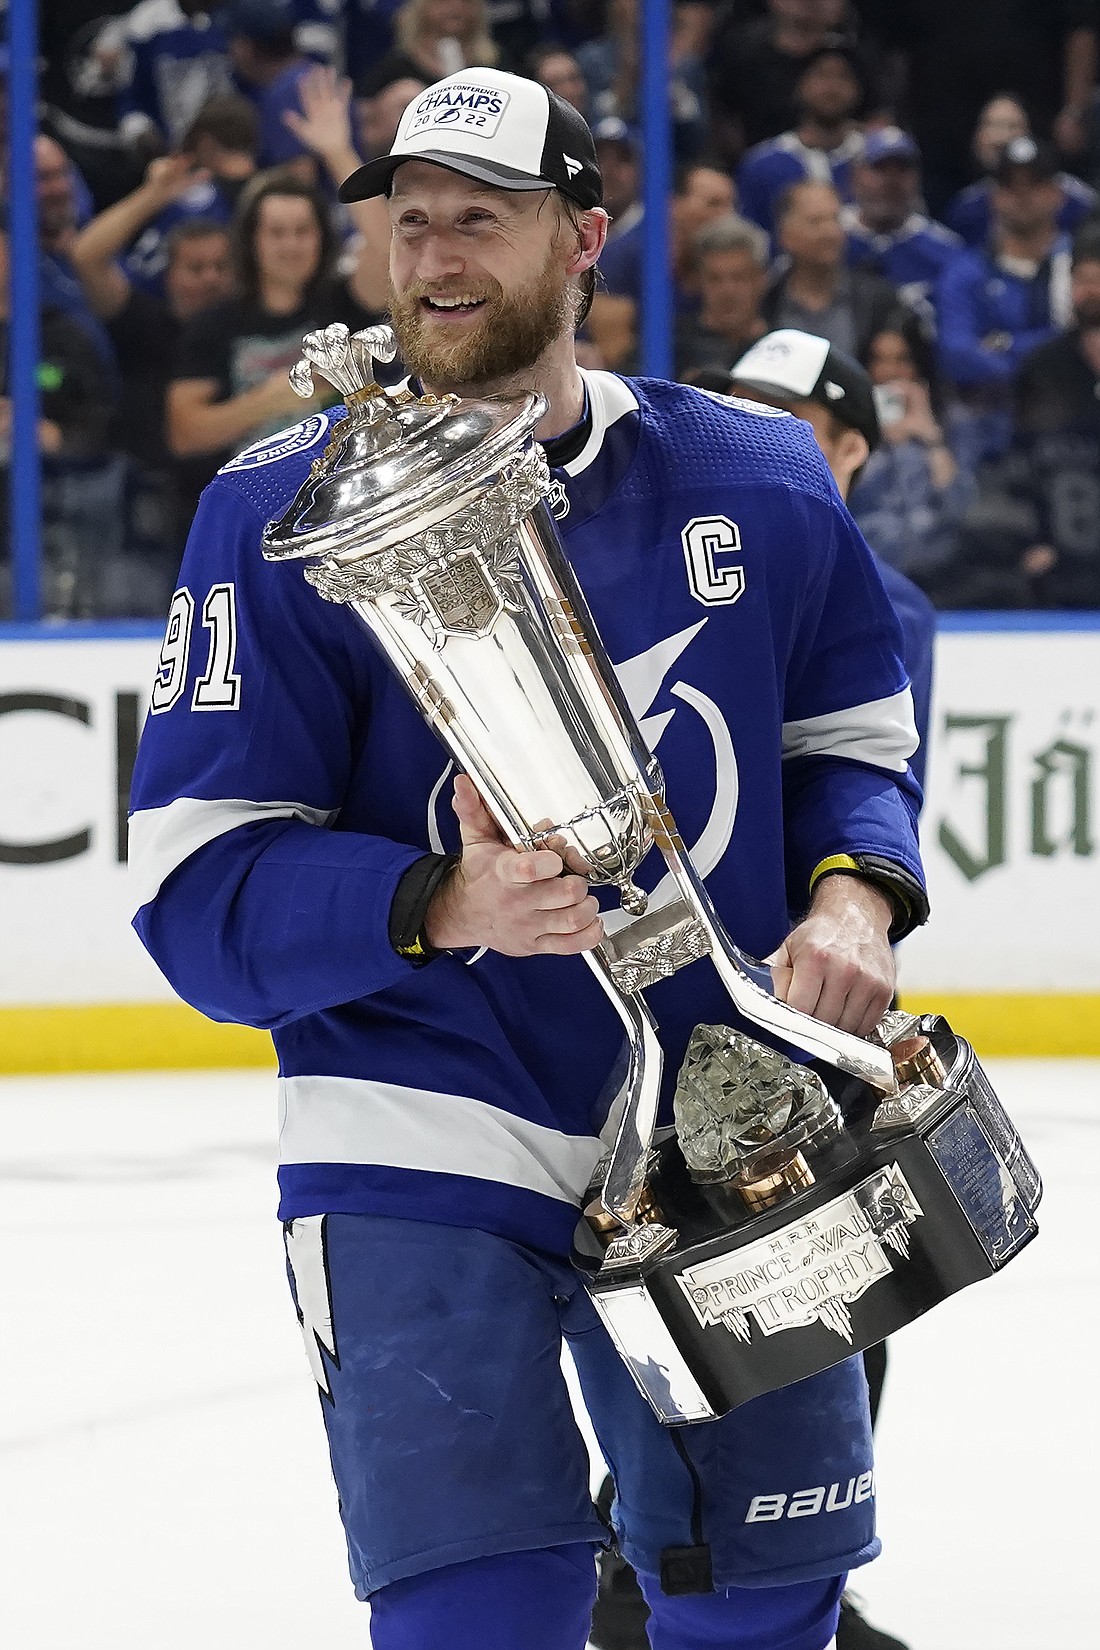 ANY NAME AND NUMBER 2022 STANLEY CUP FINAL TAMPA BAY LIGHTNING